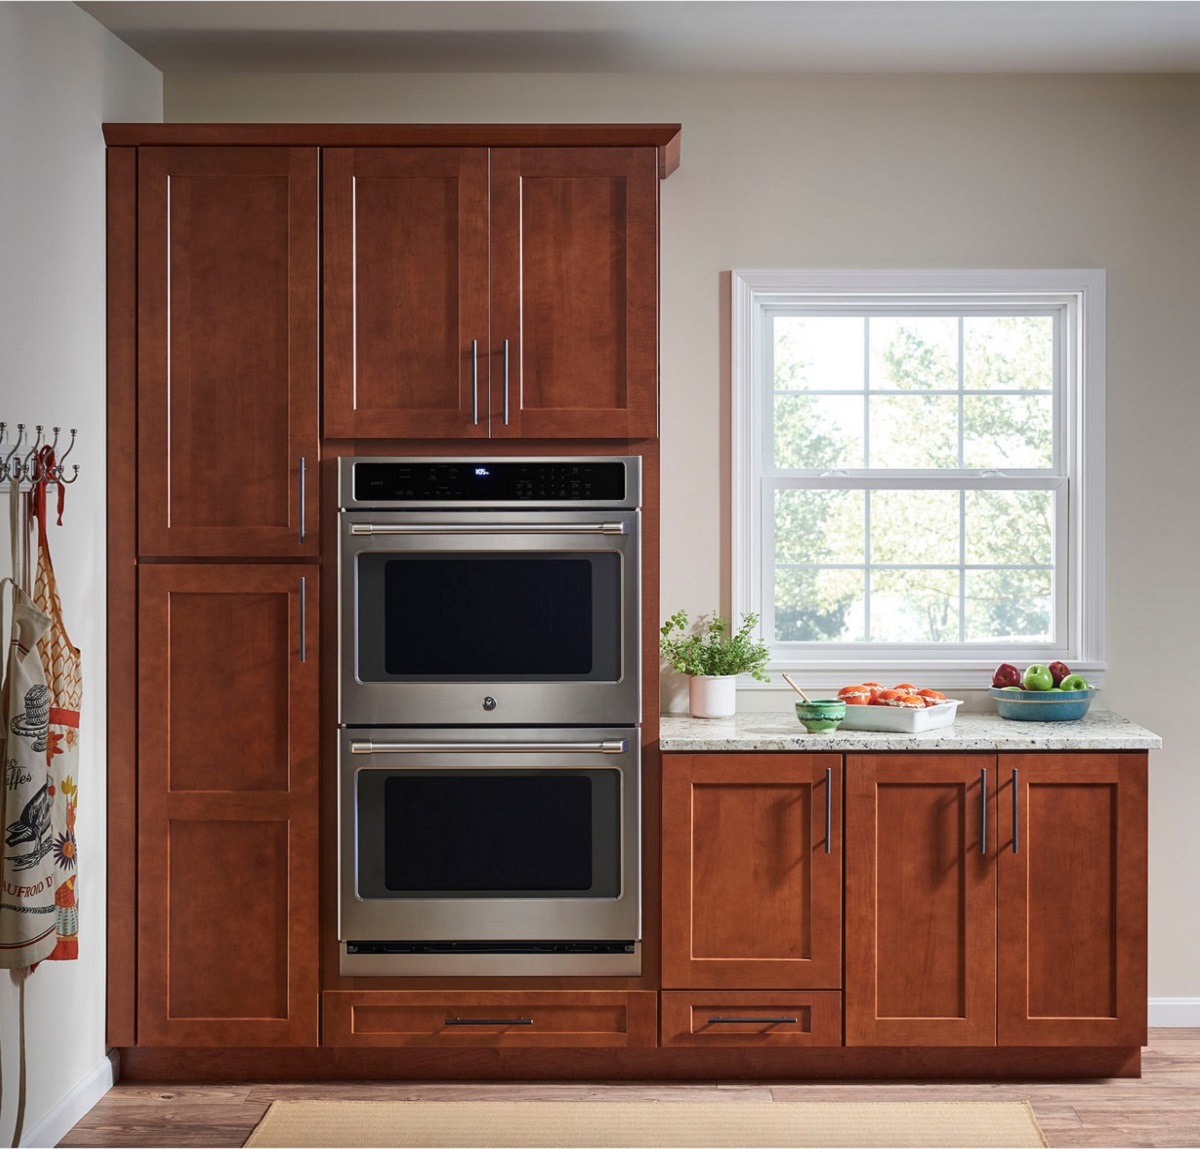 The Best Double Ovens